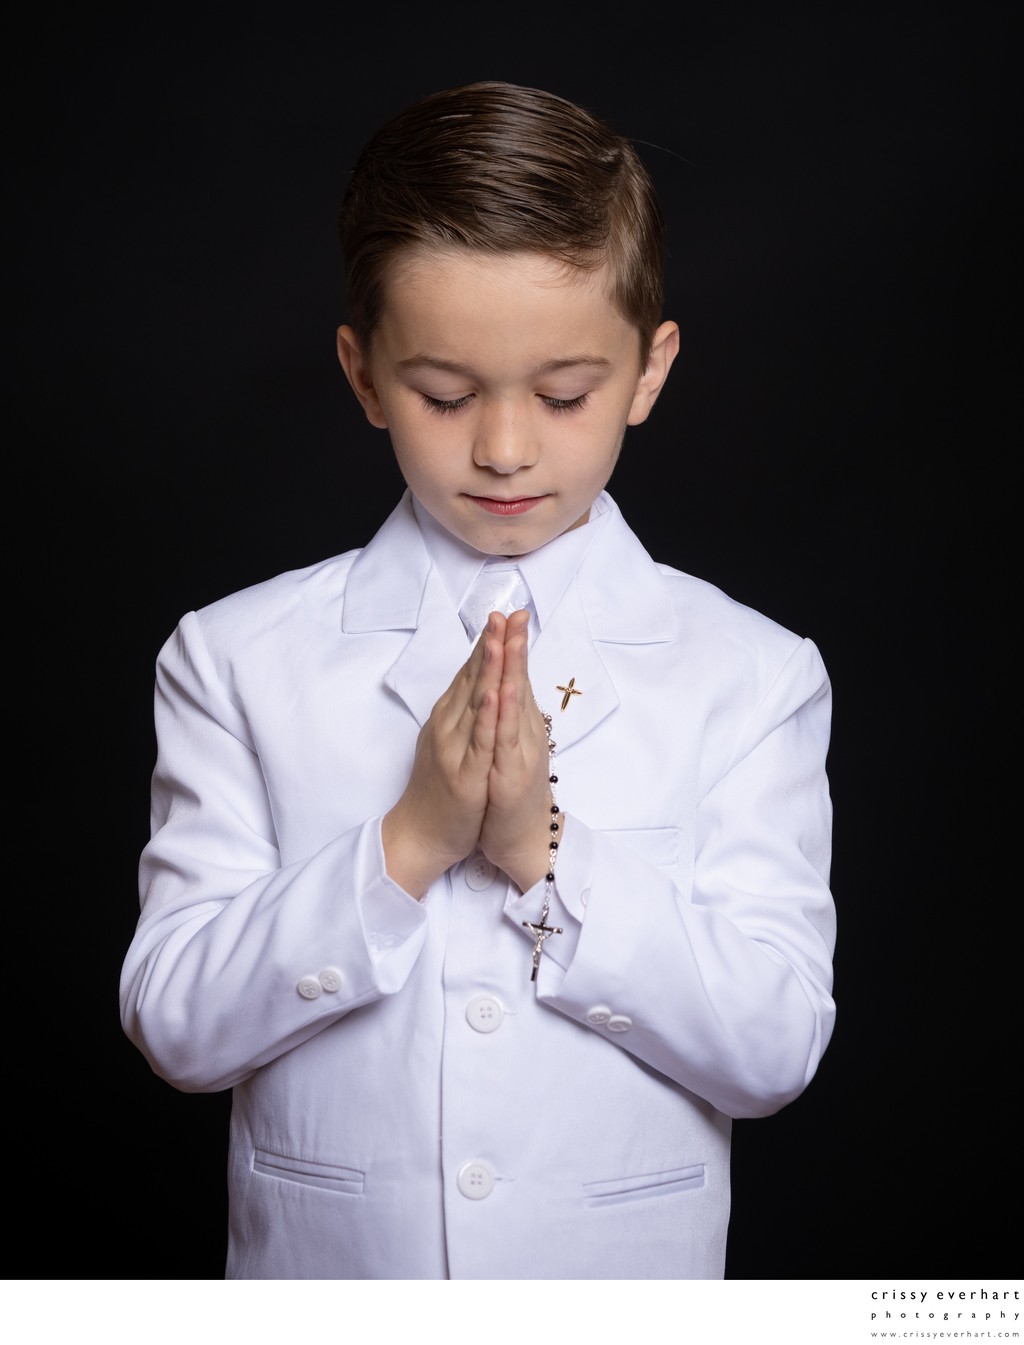 Communion Photo of Boy Praying with Rosary Beads